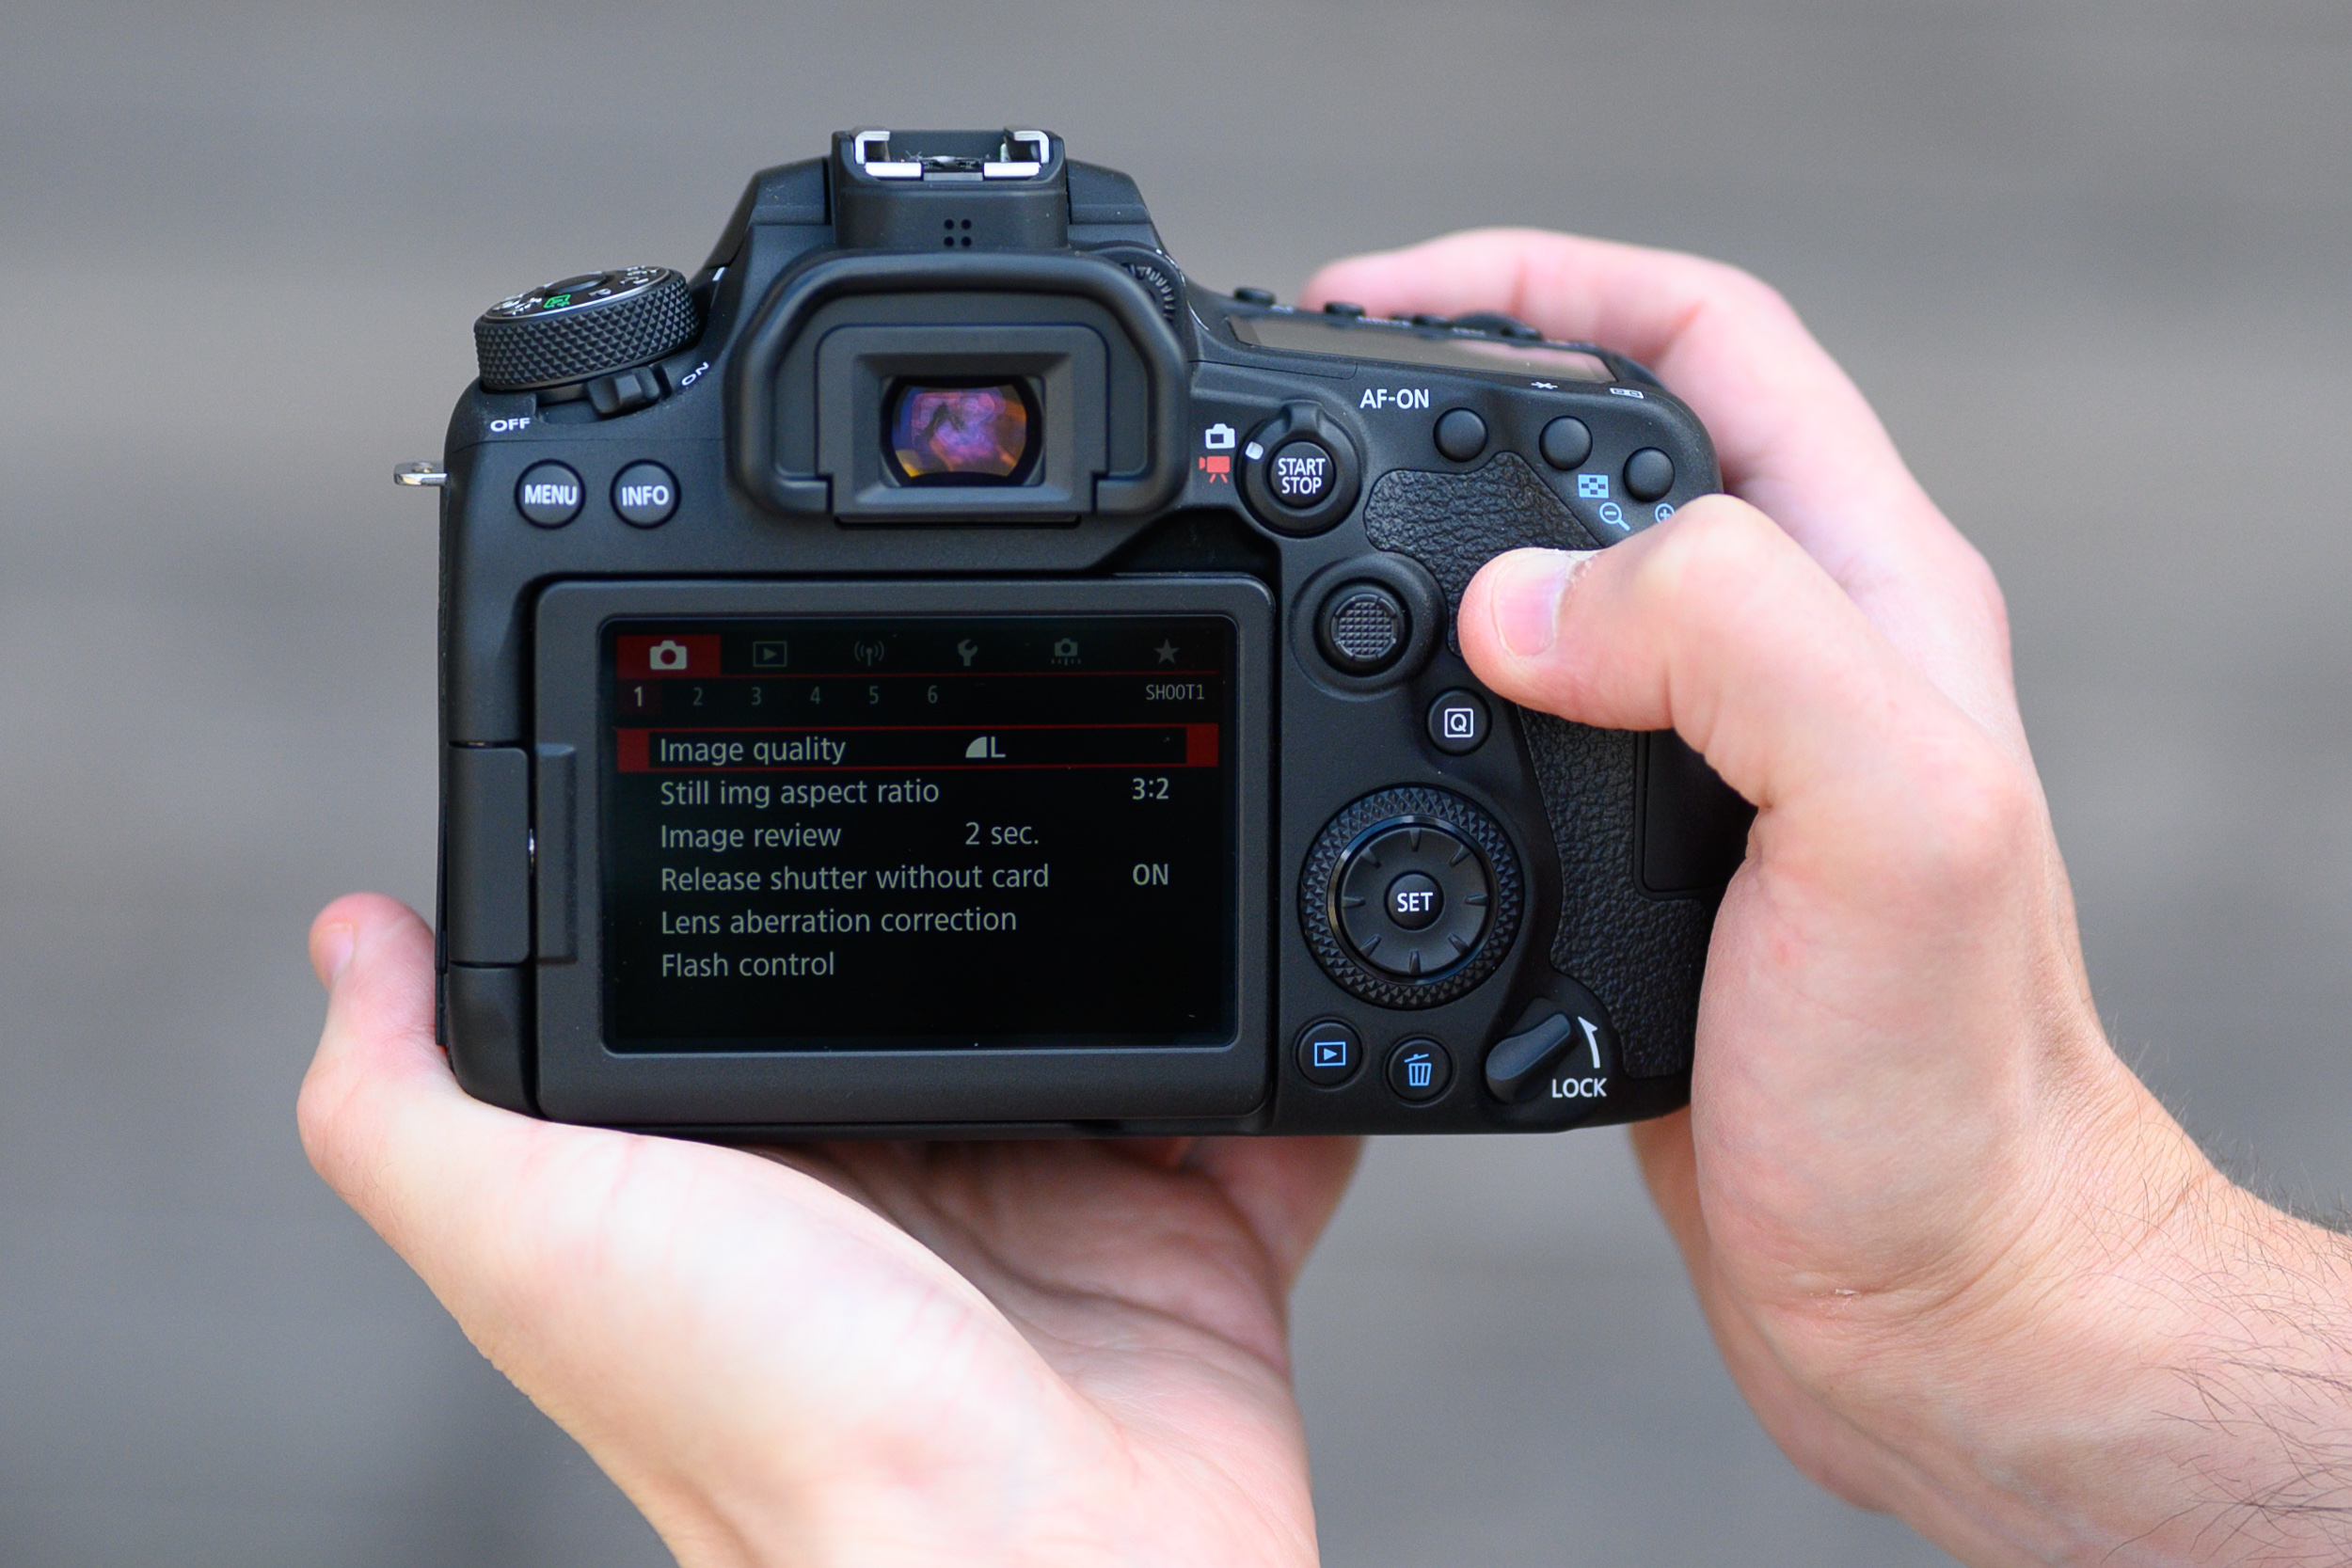 canon-eos-90d-32mp-enthusiast-dslr-arrives-with-4k-video-and-11fps